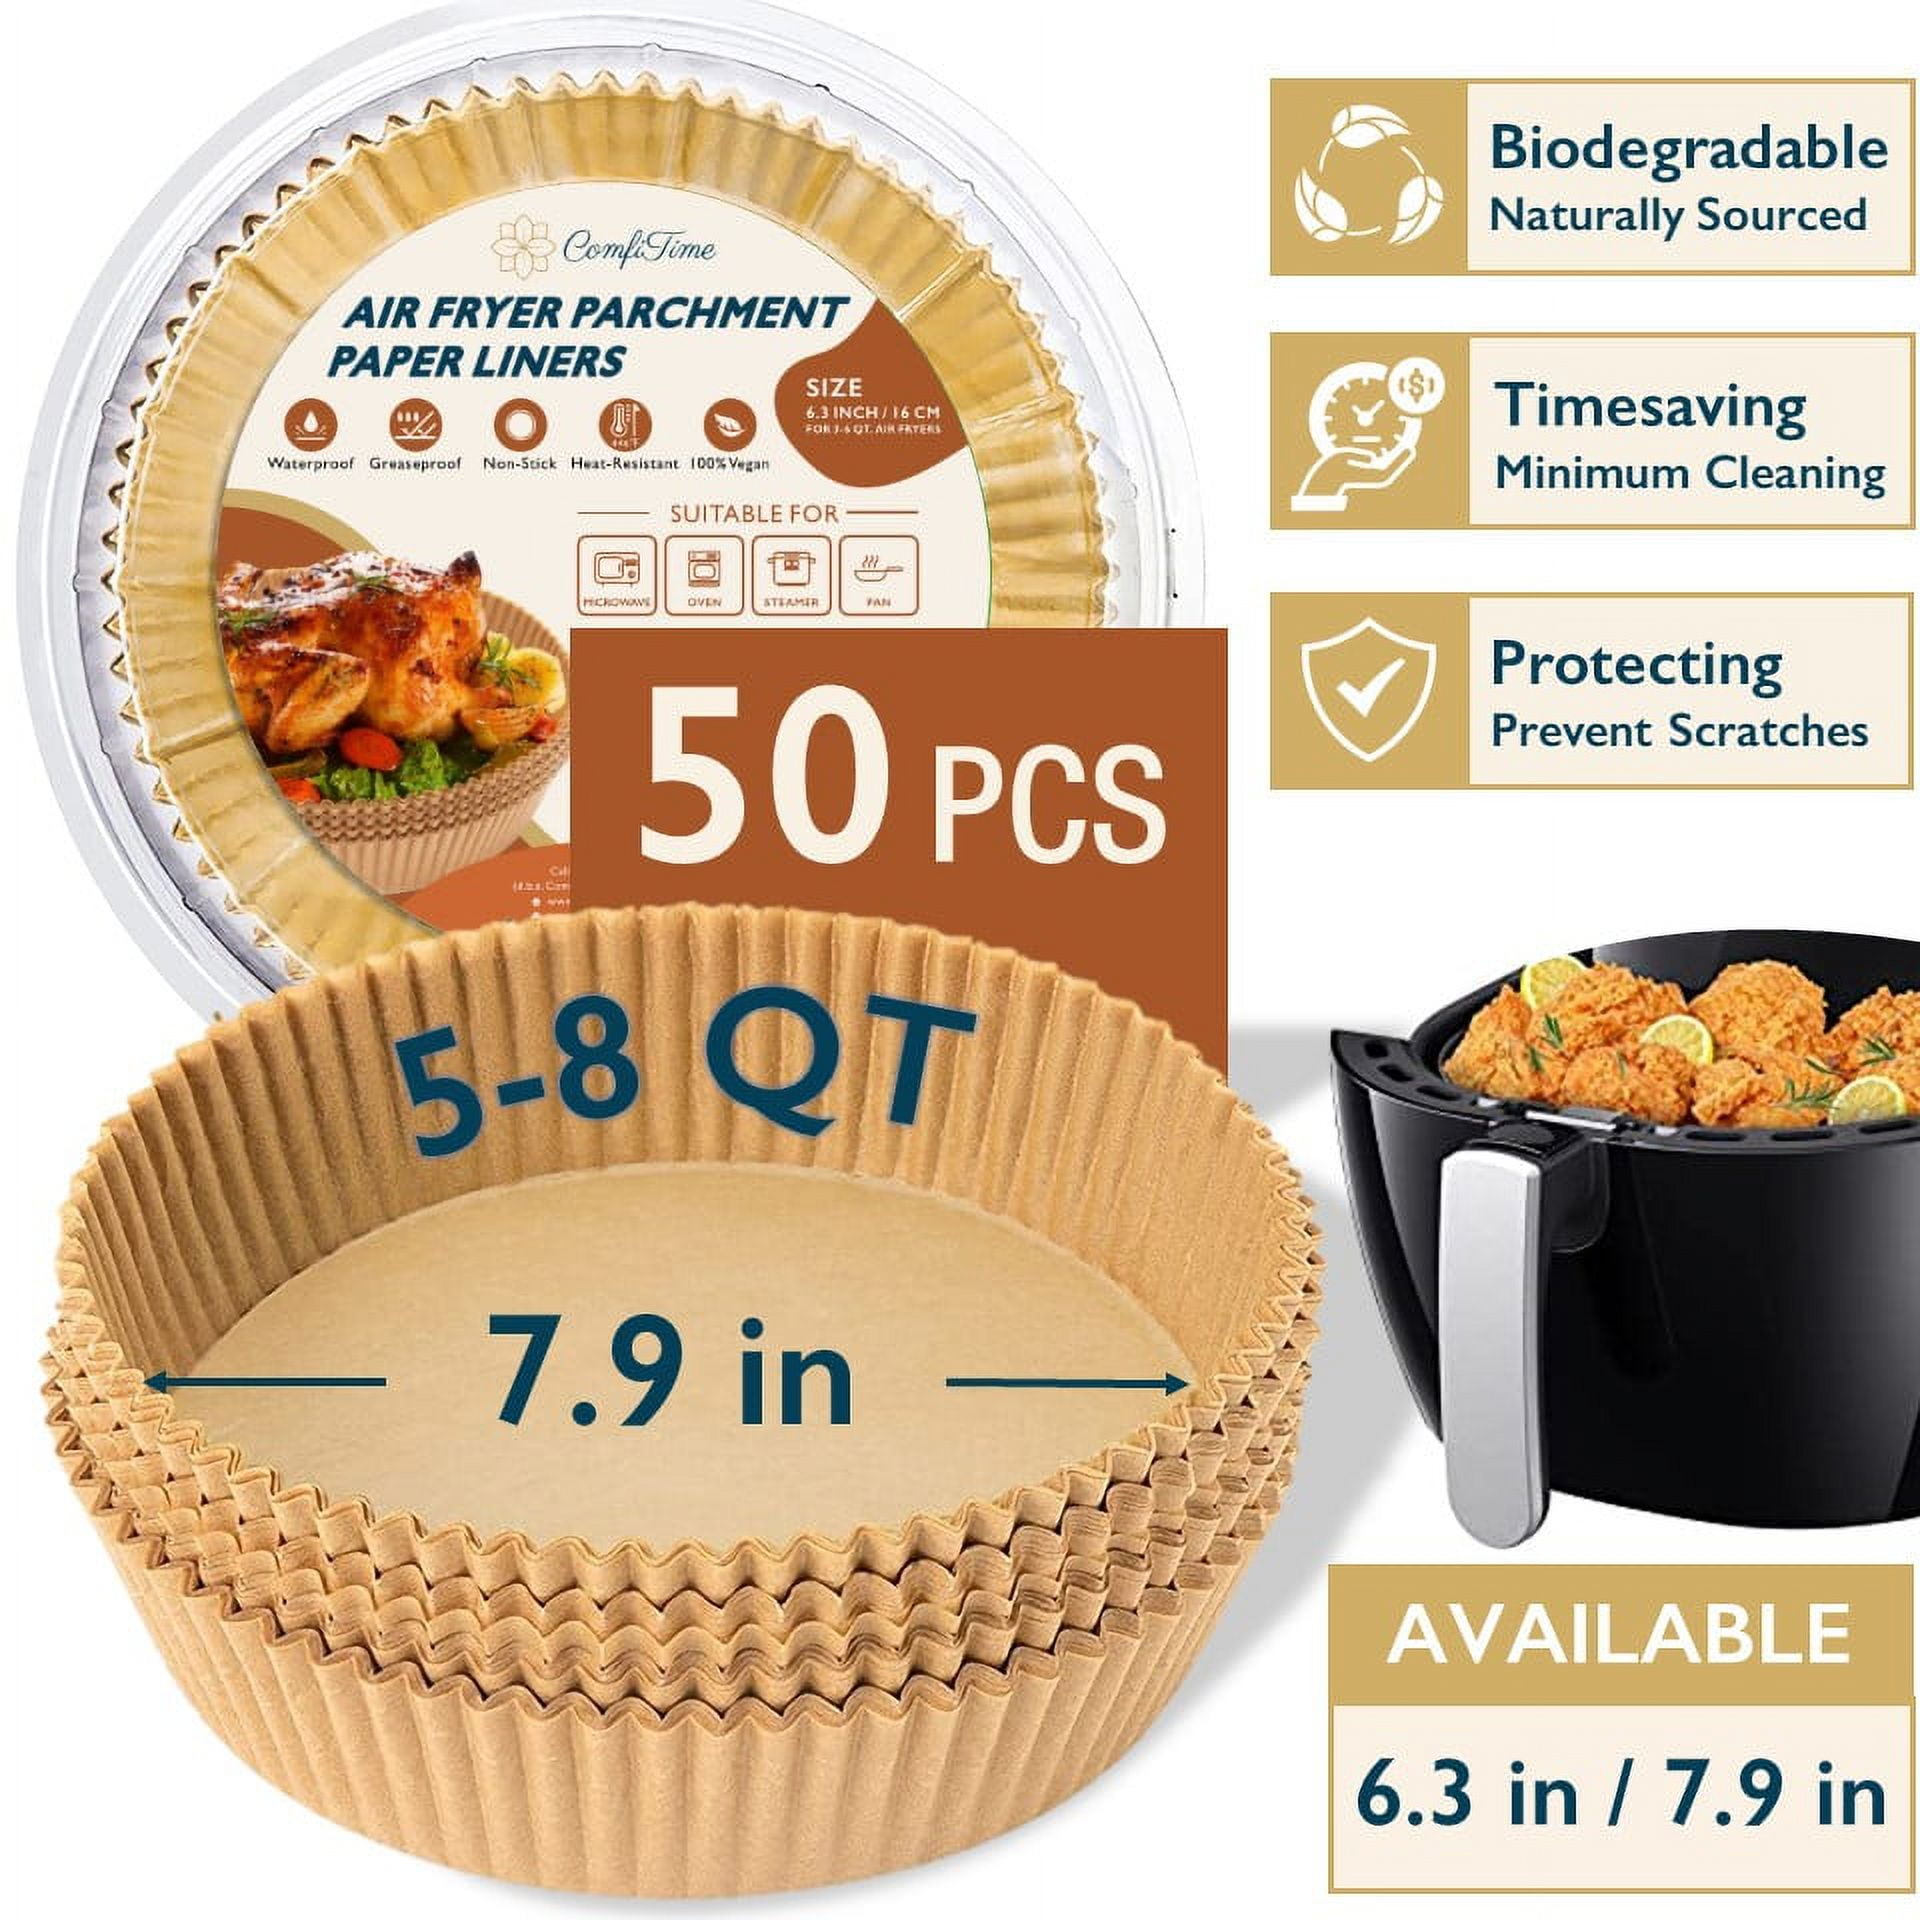 ComfiTime Air Fryer Liners – 7.9” Round/Square Disposable Parchment Paper  Sheets, Unbleached, Non-Stick, Water/Oil/Greaseproof, Oven Baking Paper  Liners for 5-8 Quart Air Fryers, 50 PCS 